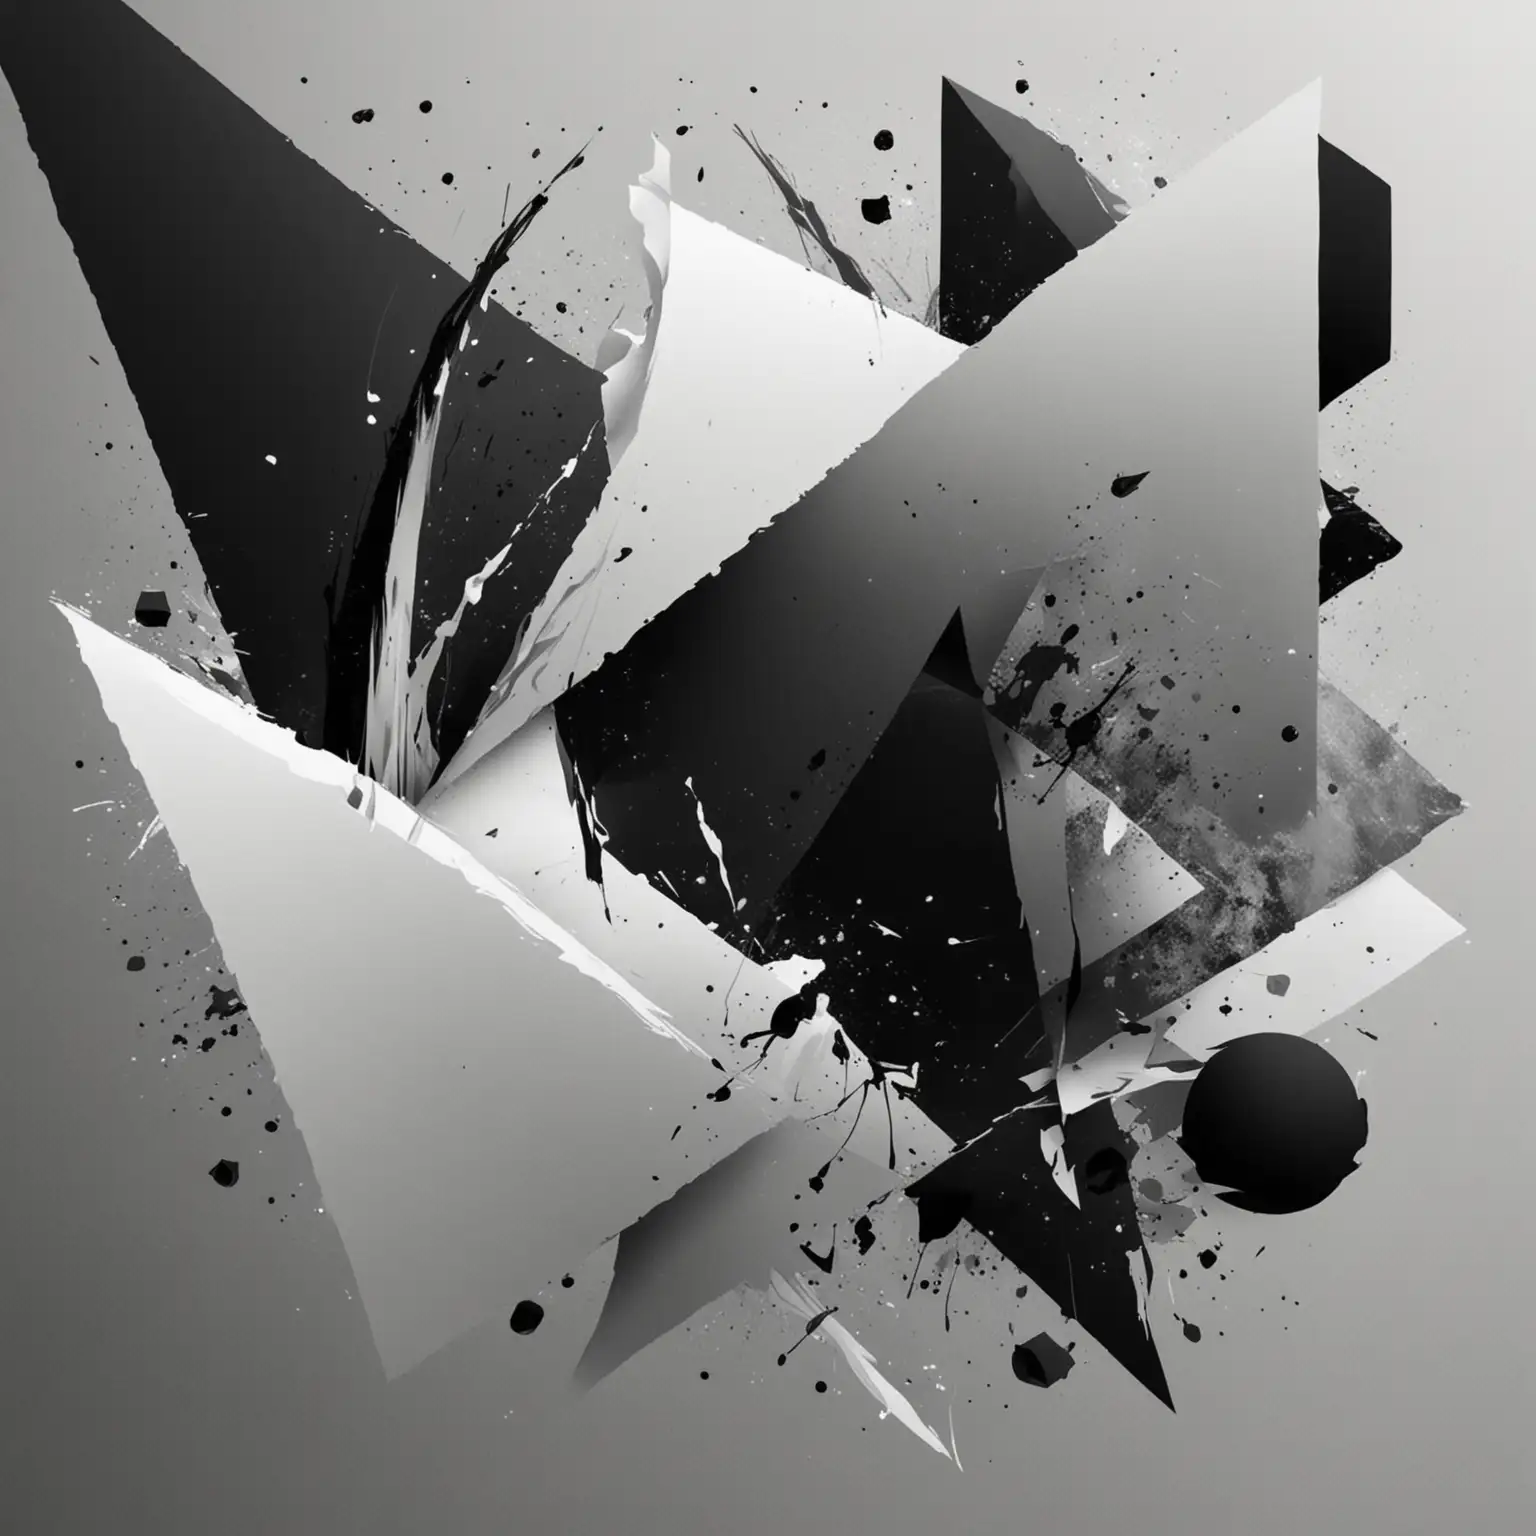 create an image that depicts a background with a black and white abstract shapes 